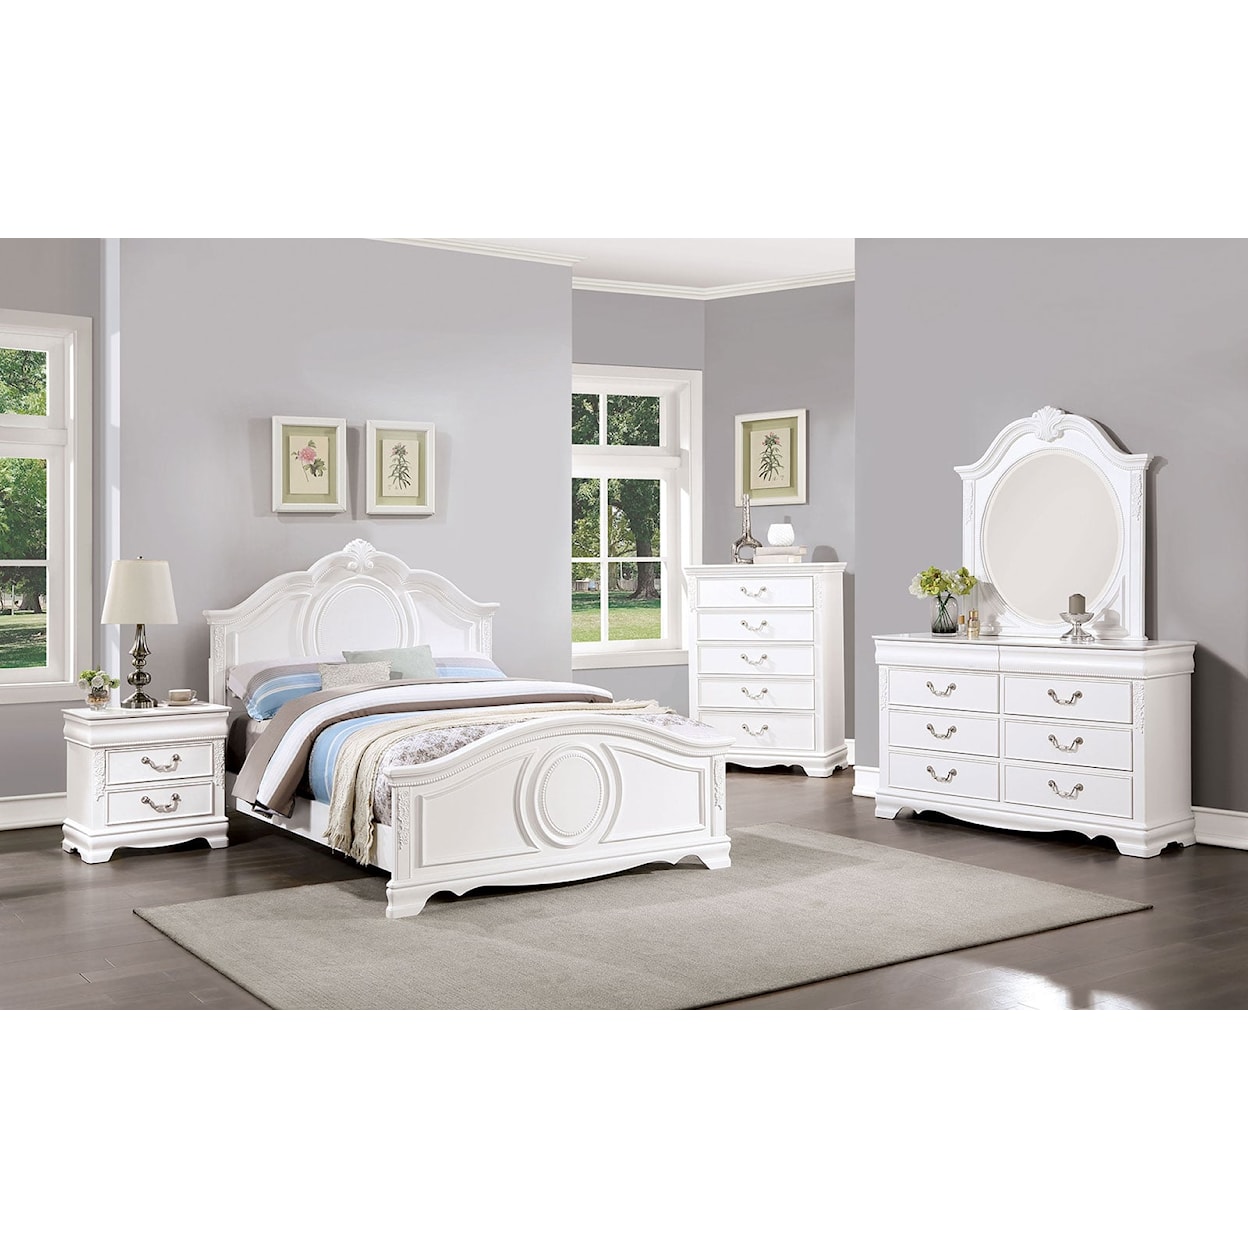 Furniture of America Alecia 4-Piece Full Bedroom Set with Carved Details